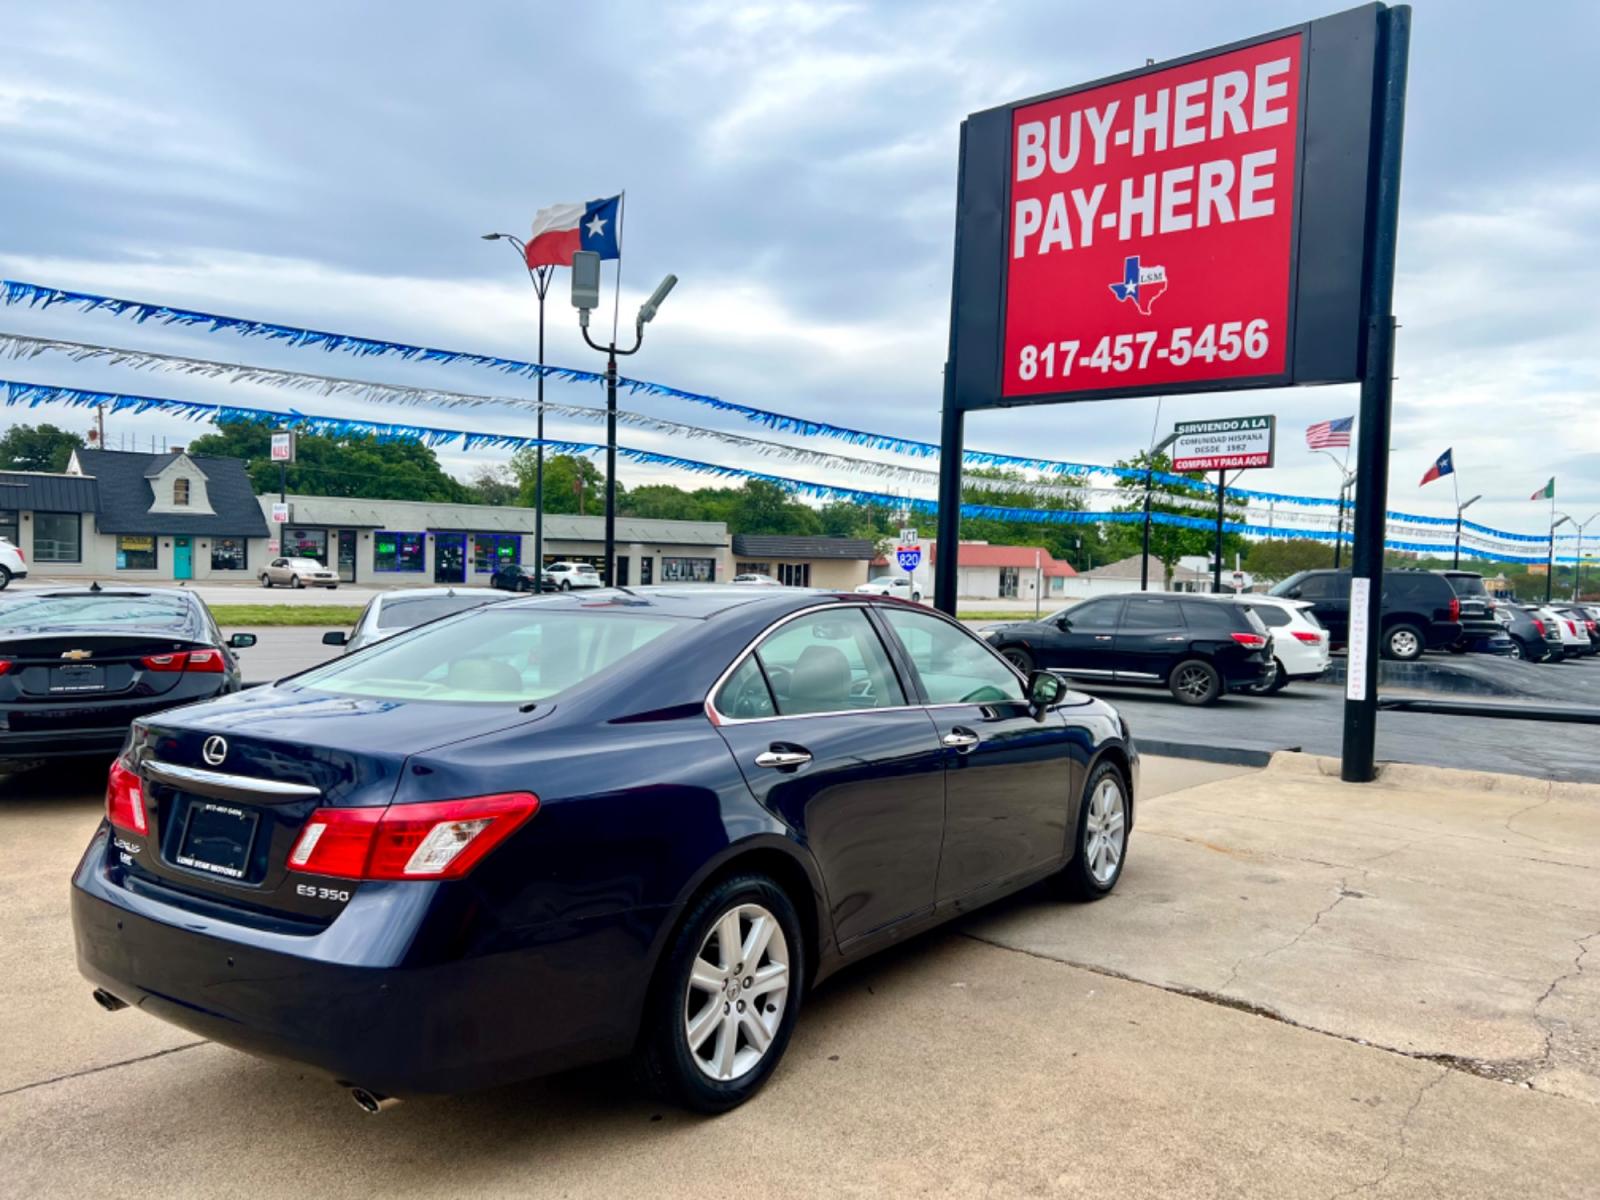 2008 BLUE LEXUS ES 350 (JTHBJ46G682) , located at 5900 E. Lancaster Ave., Fort Worth, TX, 76112, (817) 457-5456, 0.000000, 0.000000 - This is a 2008 LEXUS ES350 LUXURY 4 DR SEDAN that is in excellent condition. The interior is clean with no rips or tears or stains. All power windows, door locks and seats. Ice cold AC for those hot Texas summer days. It is equipped with a CD player, AM/FM radio. It runs and drives like new. The tir - Photo #5